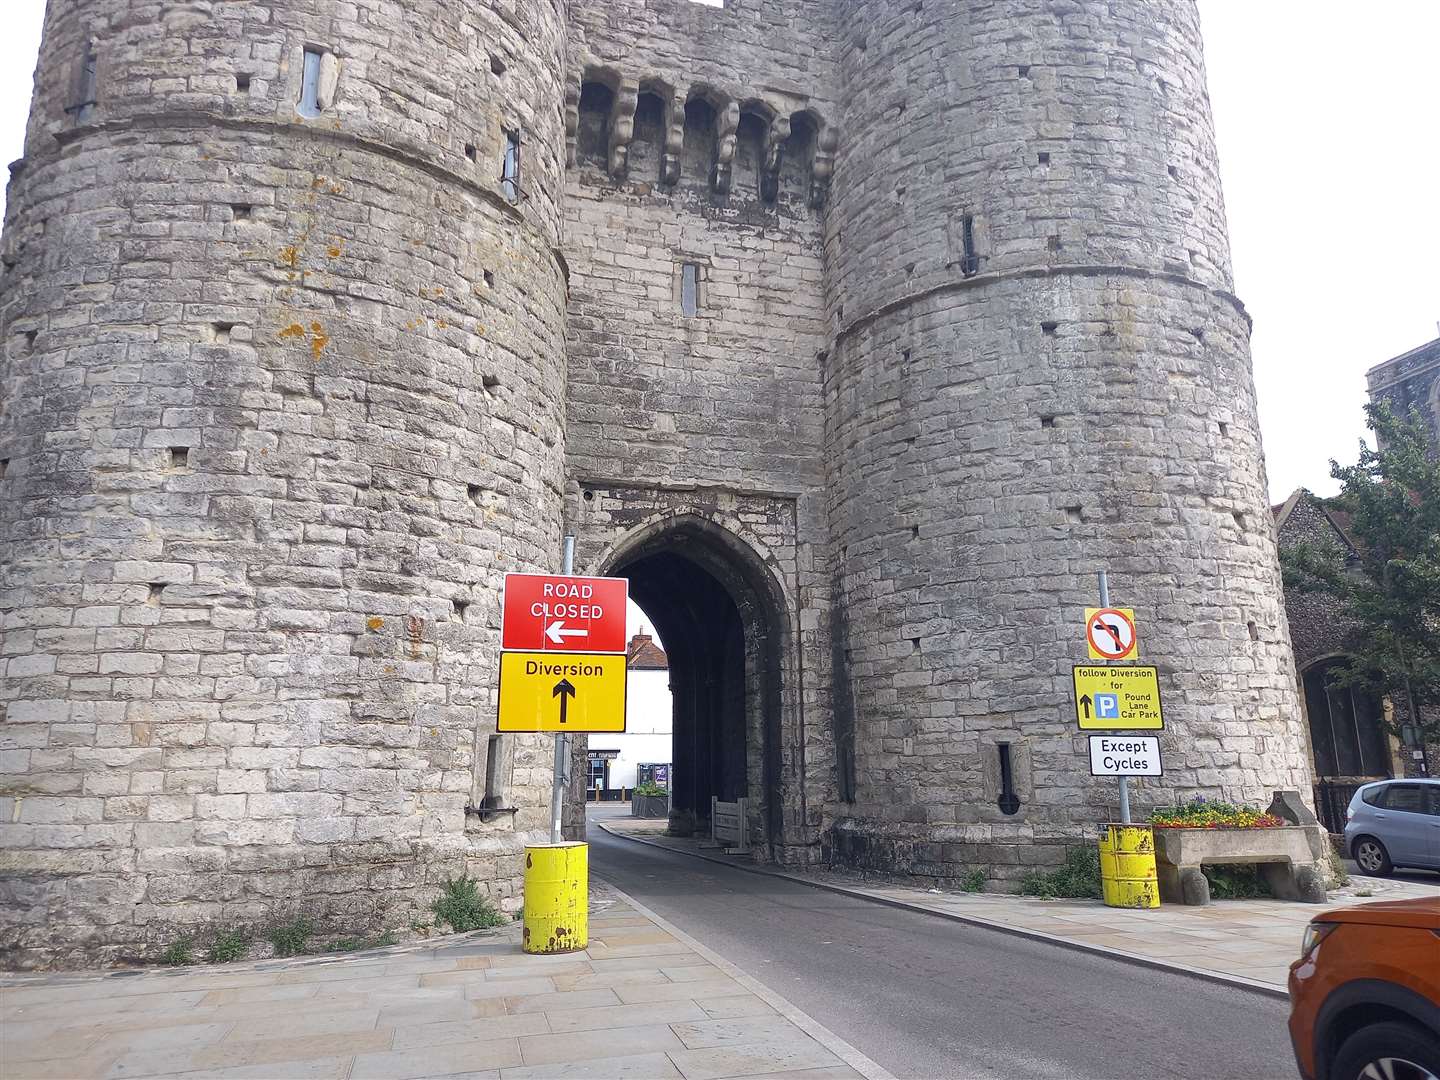 The gang attack happened near Westgate Towers in Canterbury